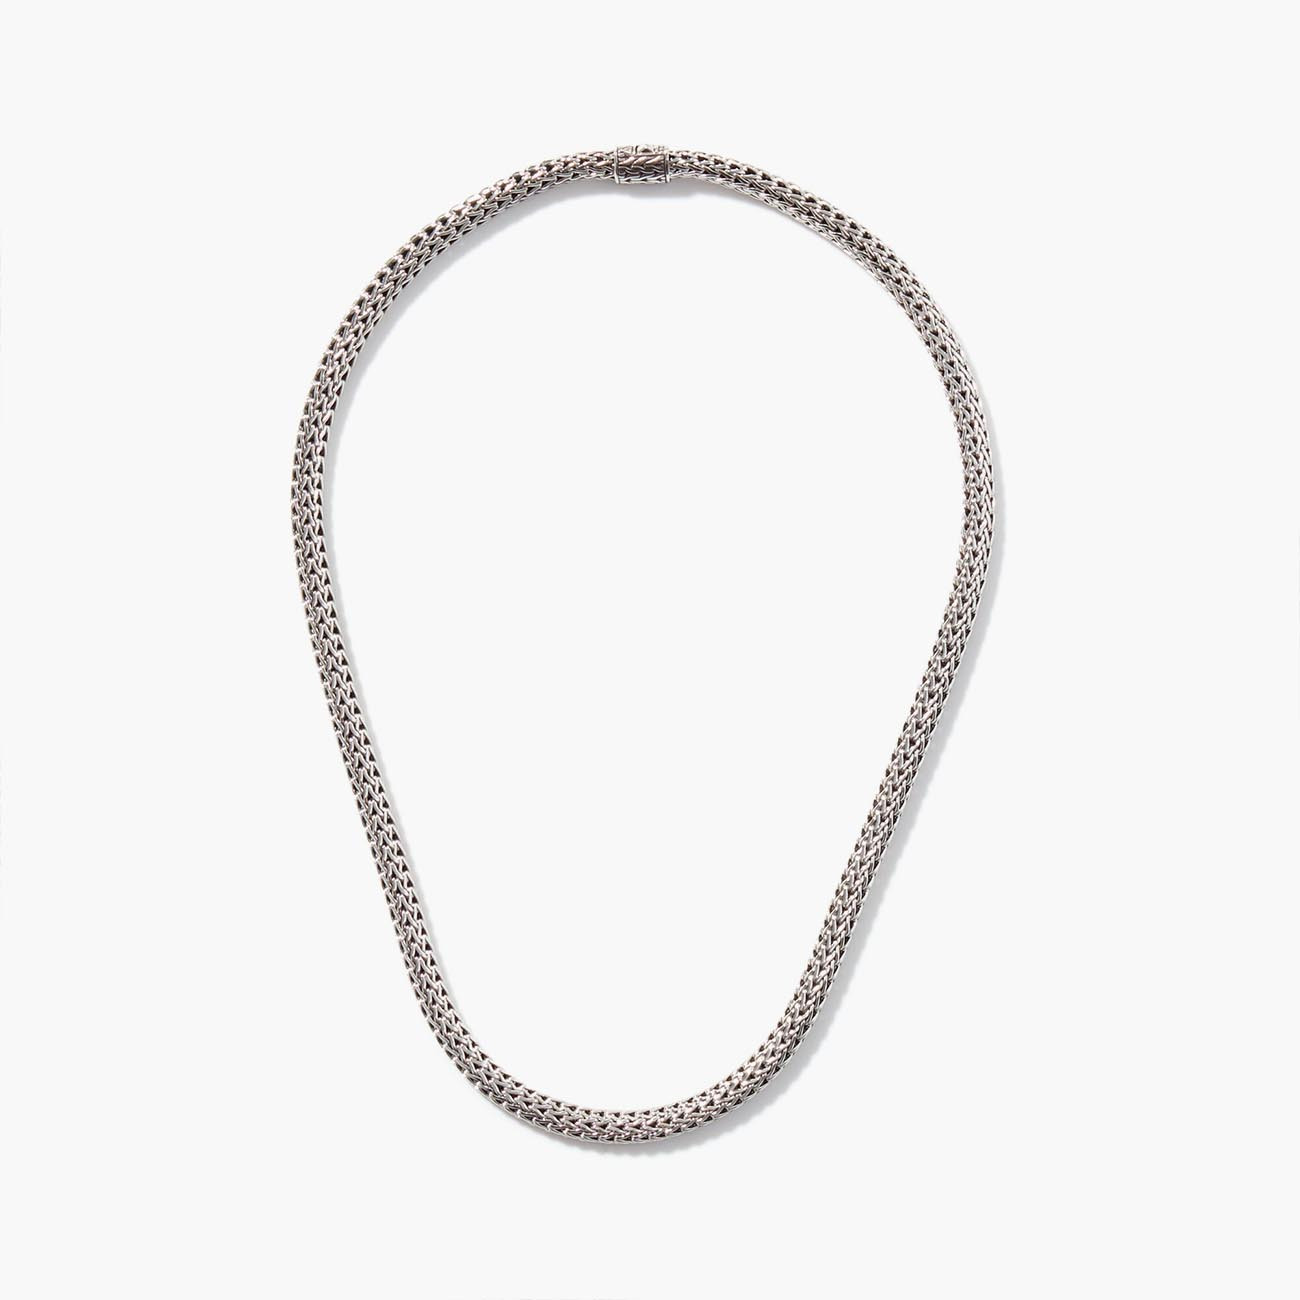 John Hardy Classic Chain Silver Necklace with Chain Clasp